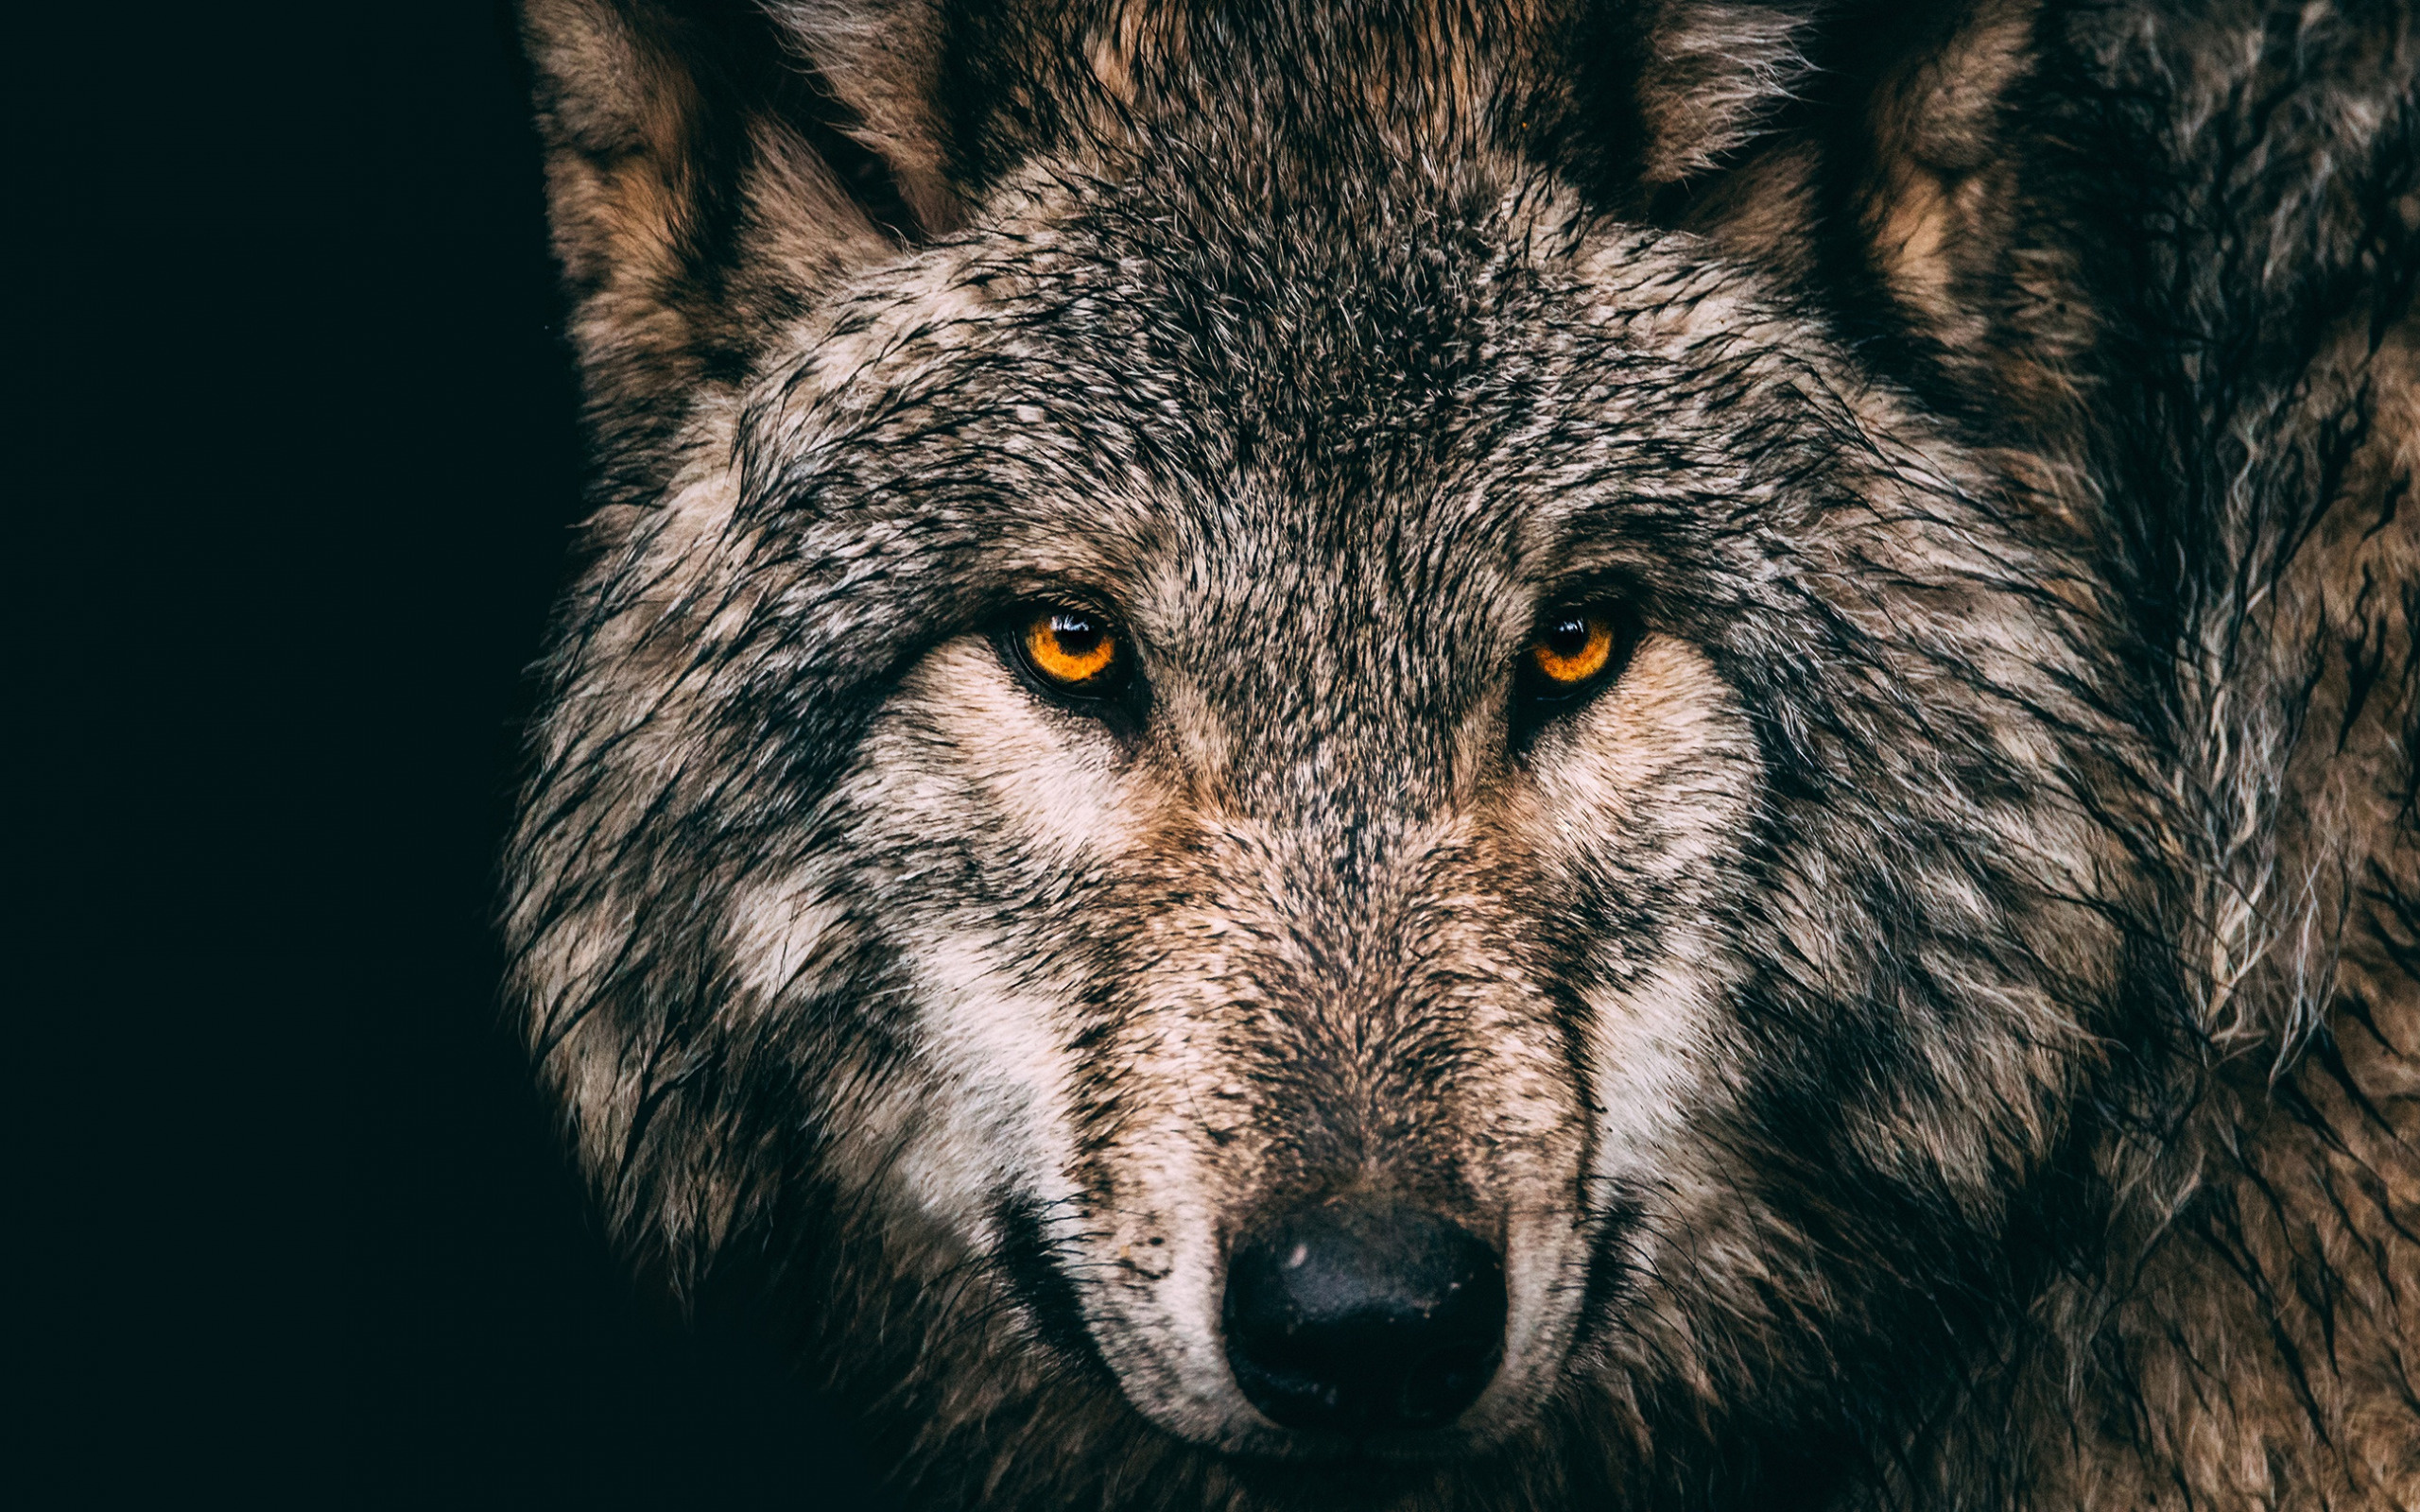 Gray Wolf: The members of the canine family, Ability to form strong social bonds, The alpha male. 2560x1600 HD Wallpaper.